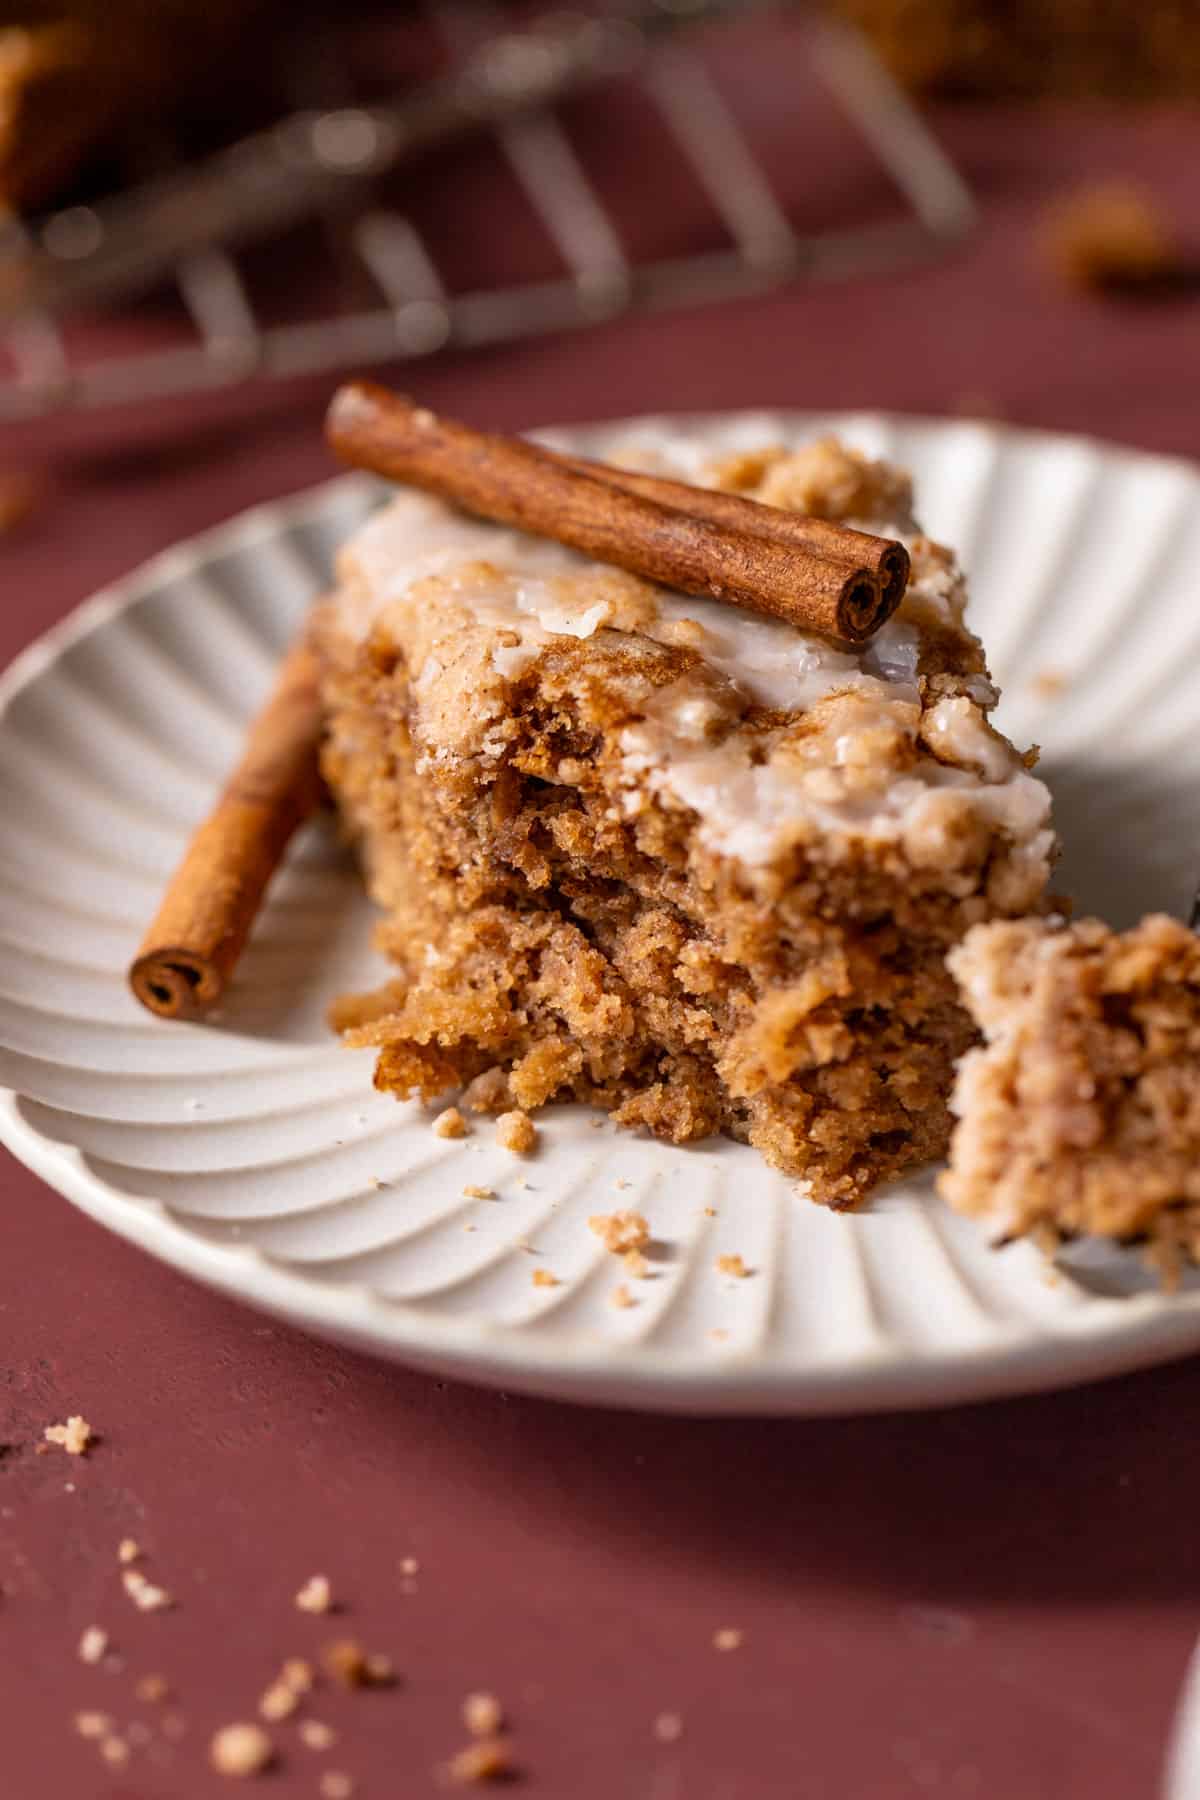 a slice of apple cake on a plate with a stick of cinnamon on top.